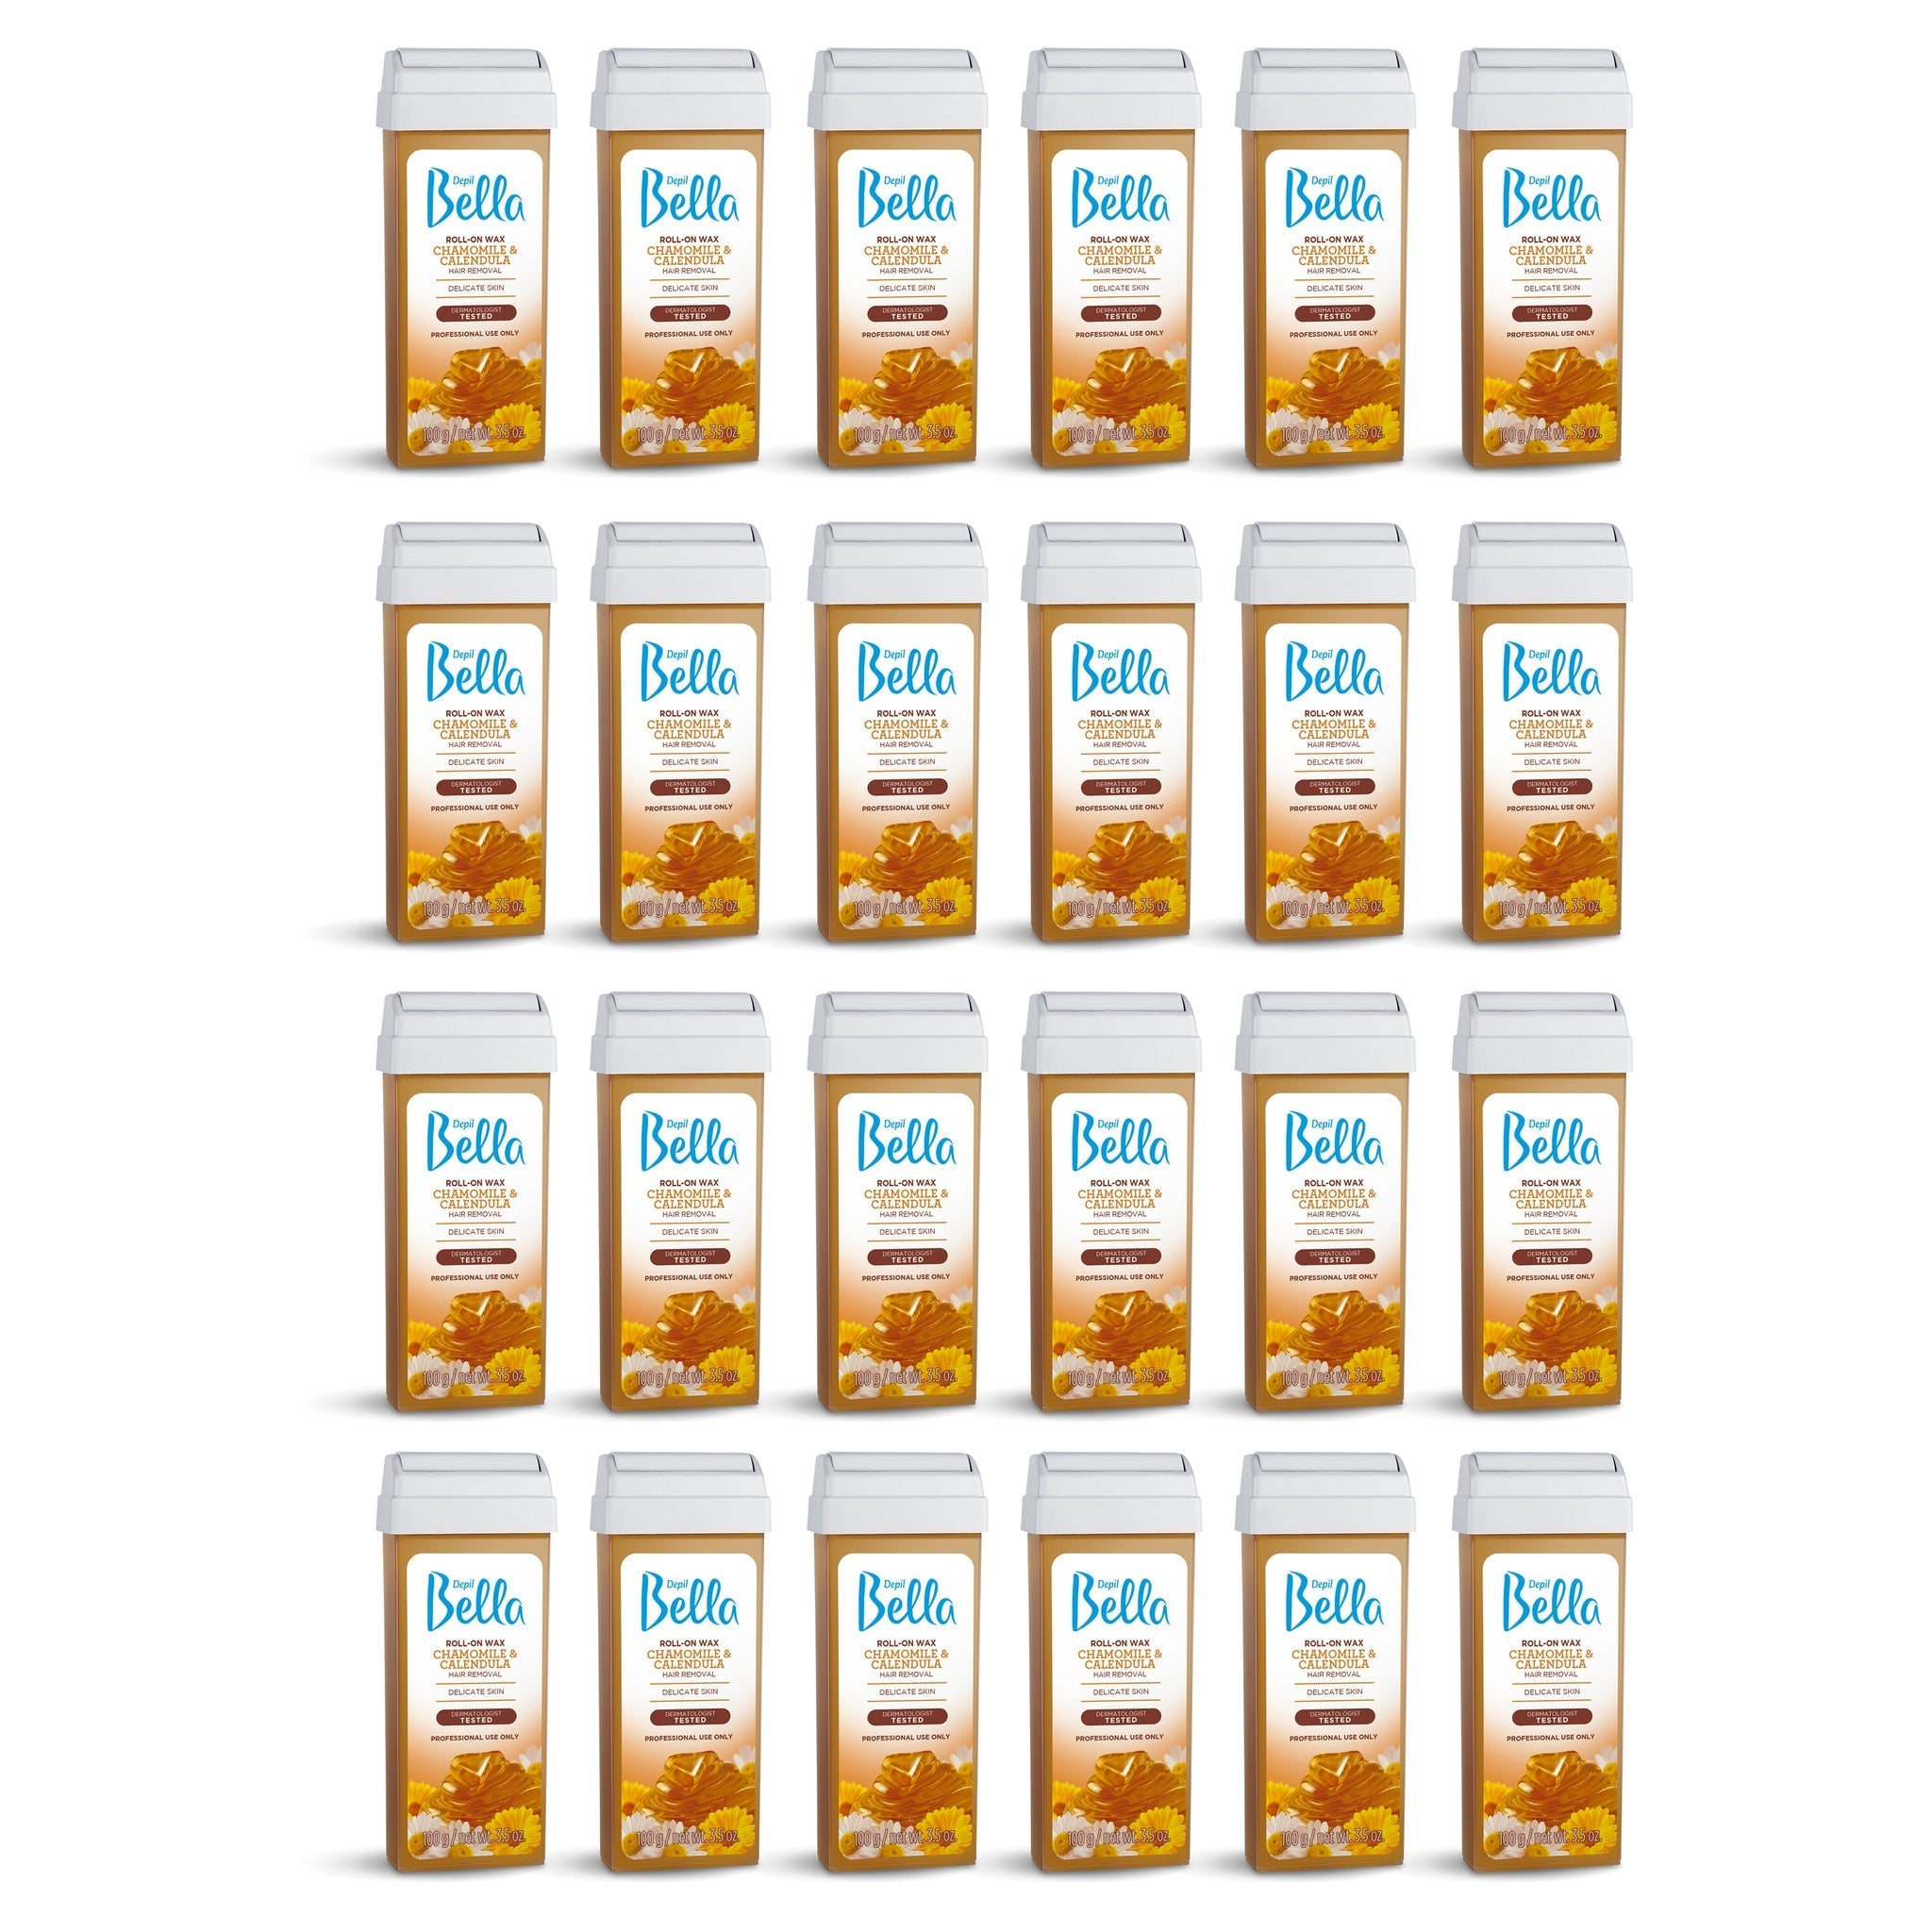 Depil Bella Hair Removal Wax Depil Bella Roll on Chamomile and Calendula Wax Hair Removal Cartridges 3.52 Oz (24 Units )